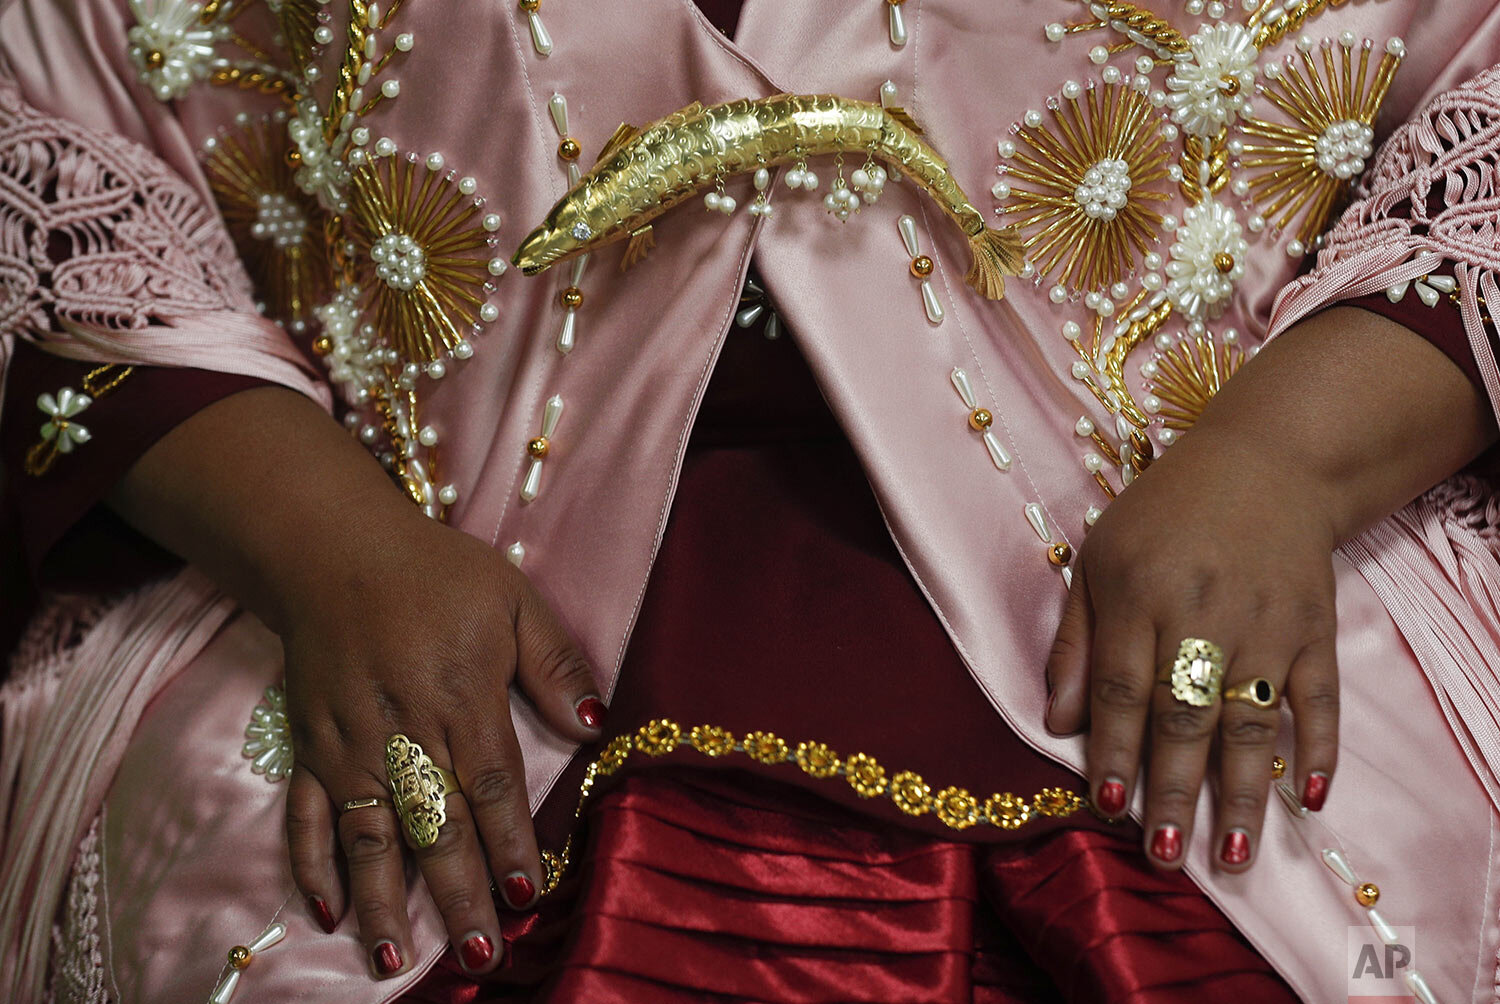  A woman shows off her jewelry before performing at a Chola fashion show in La Paz, Bolivia, Friday, Dec. 4, 2020, an event that designers and manufacturers of Chola clothing hope reactivates their economy. (AP Photo/Juan Karita) 